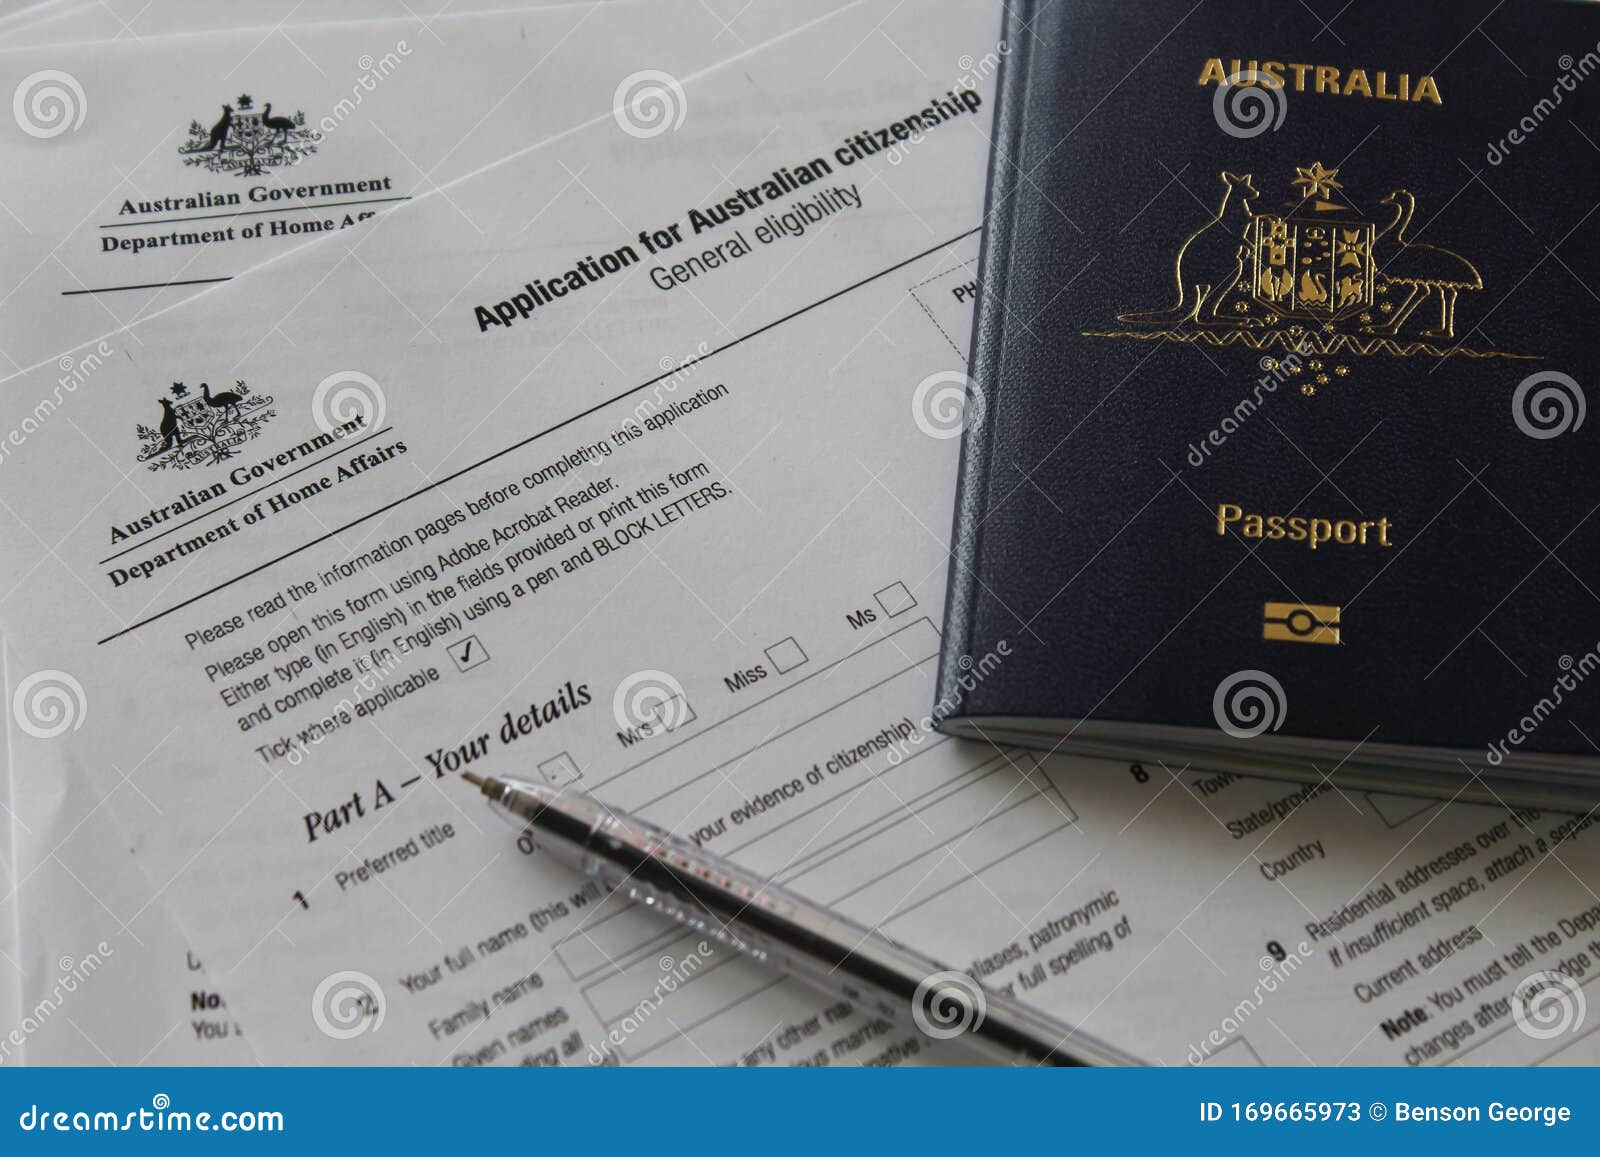 Australian Citizenship Application with Australian Passport in the Foreground - Image of emigration, ability: 169665973